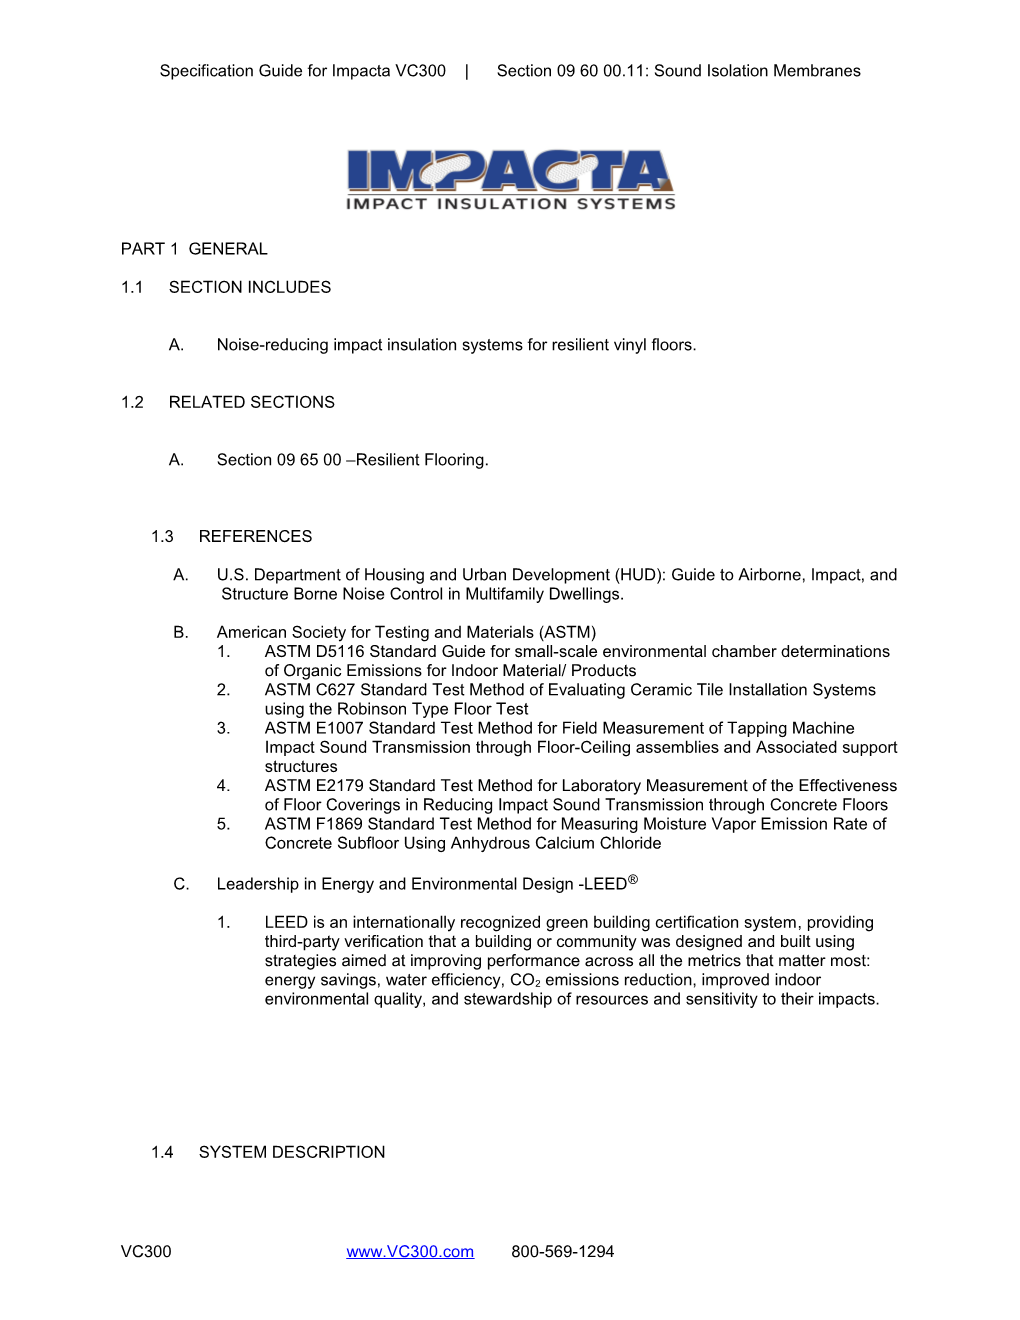 Specification Guide for Impacta-Regupol Probase Section 09 60 00.11: Sound Isolation Membranes